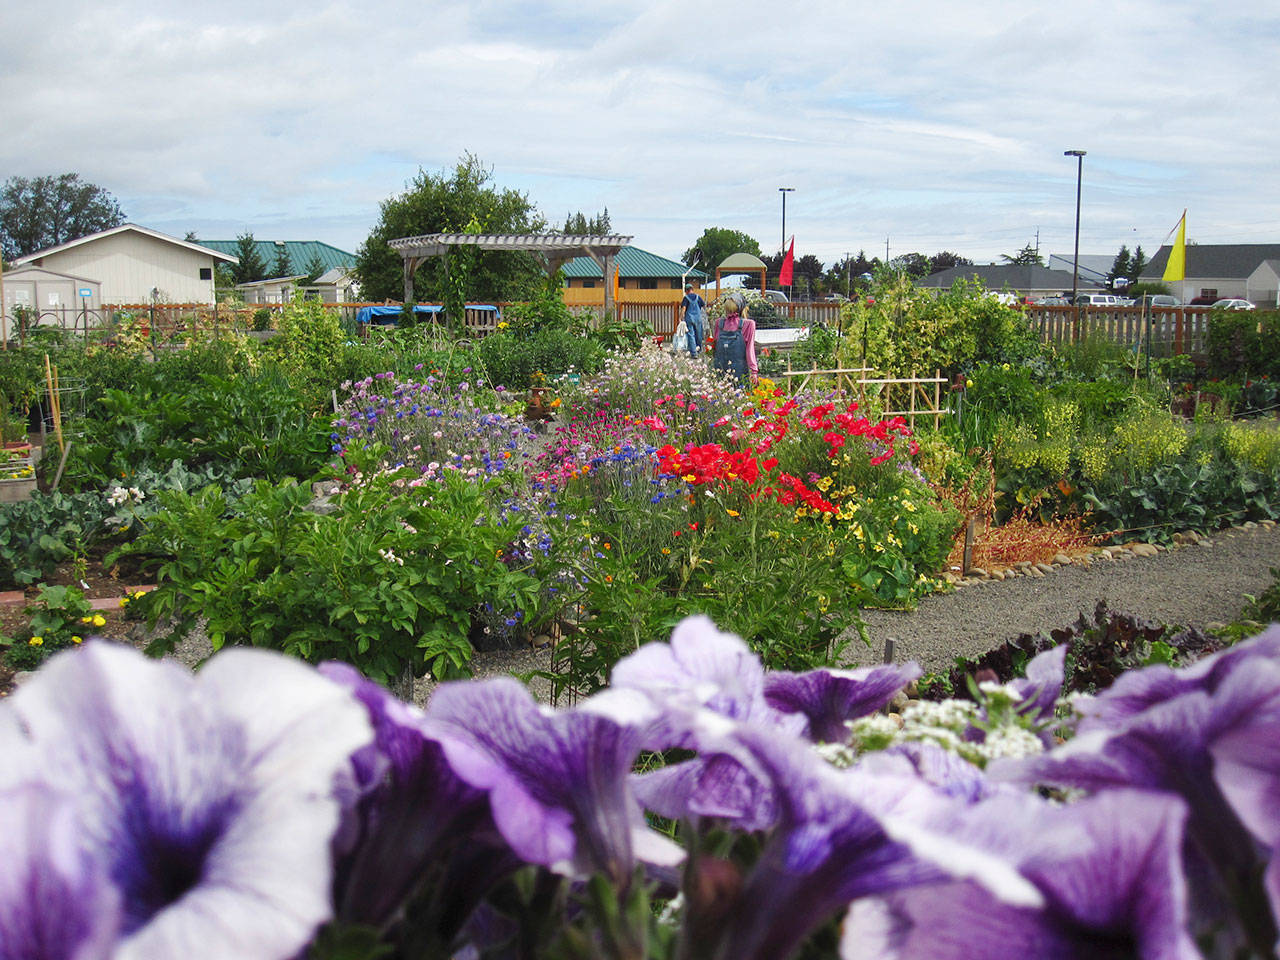 The Community Organic Gardens of Sequim group hosts two Sequim-area gardens: along West First Street (pictured) and at the June Robinson Memorial Park. Photo courtesy of Pam Larsen